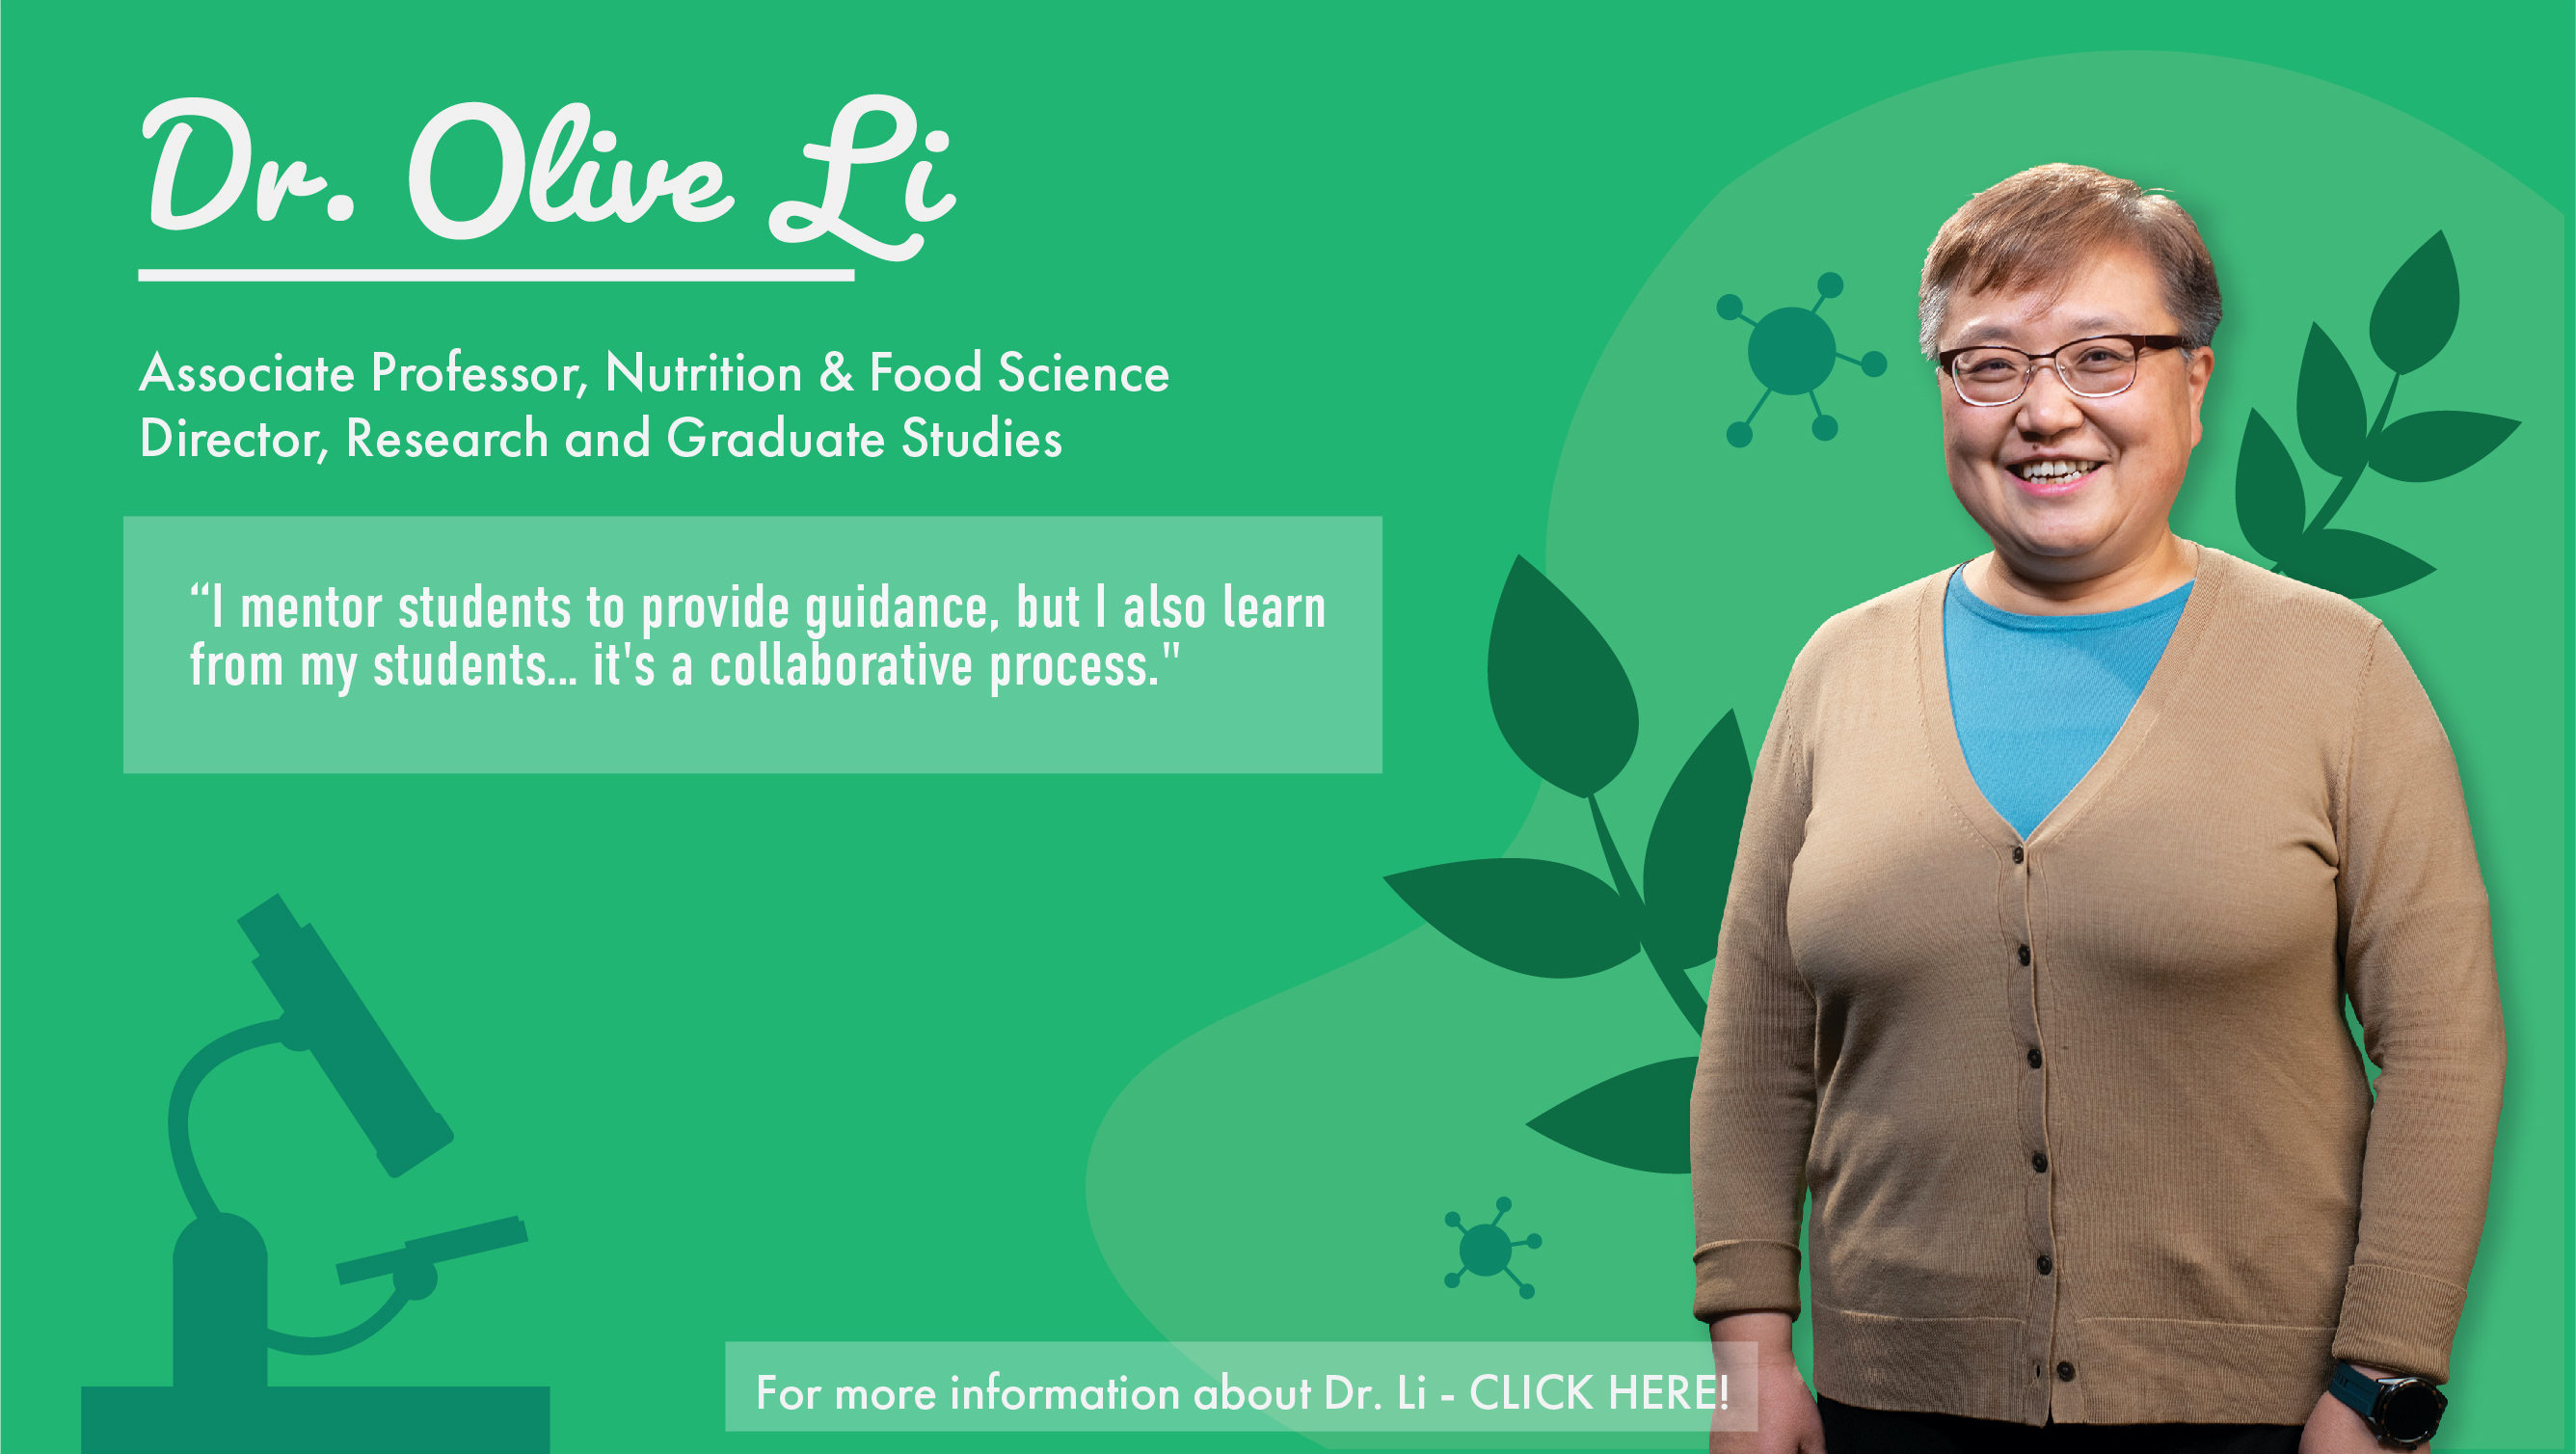 Cut out of woman on a green background. Text has her name: Dr. Olive Li, with her respective title: Associate Professor Nutrition & Food Science, Director Research and Graduate Studies